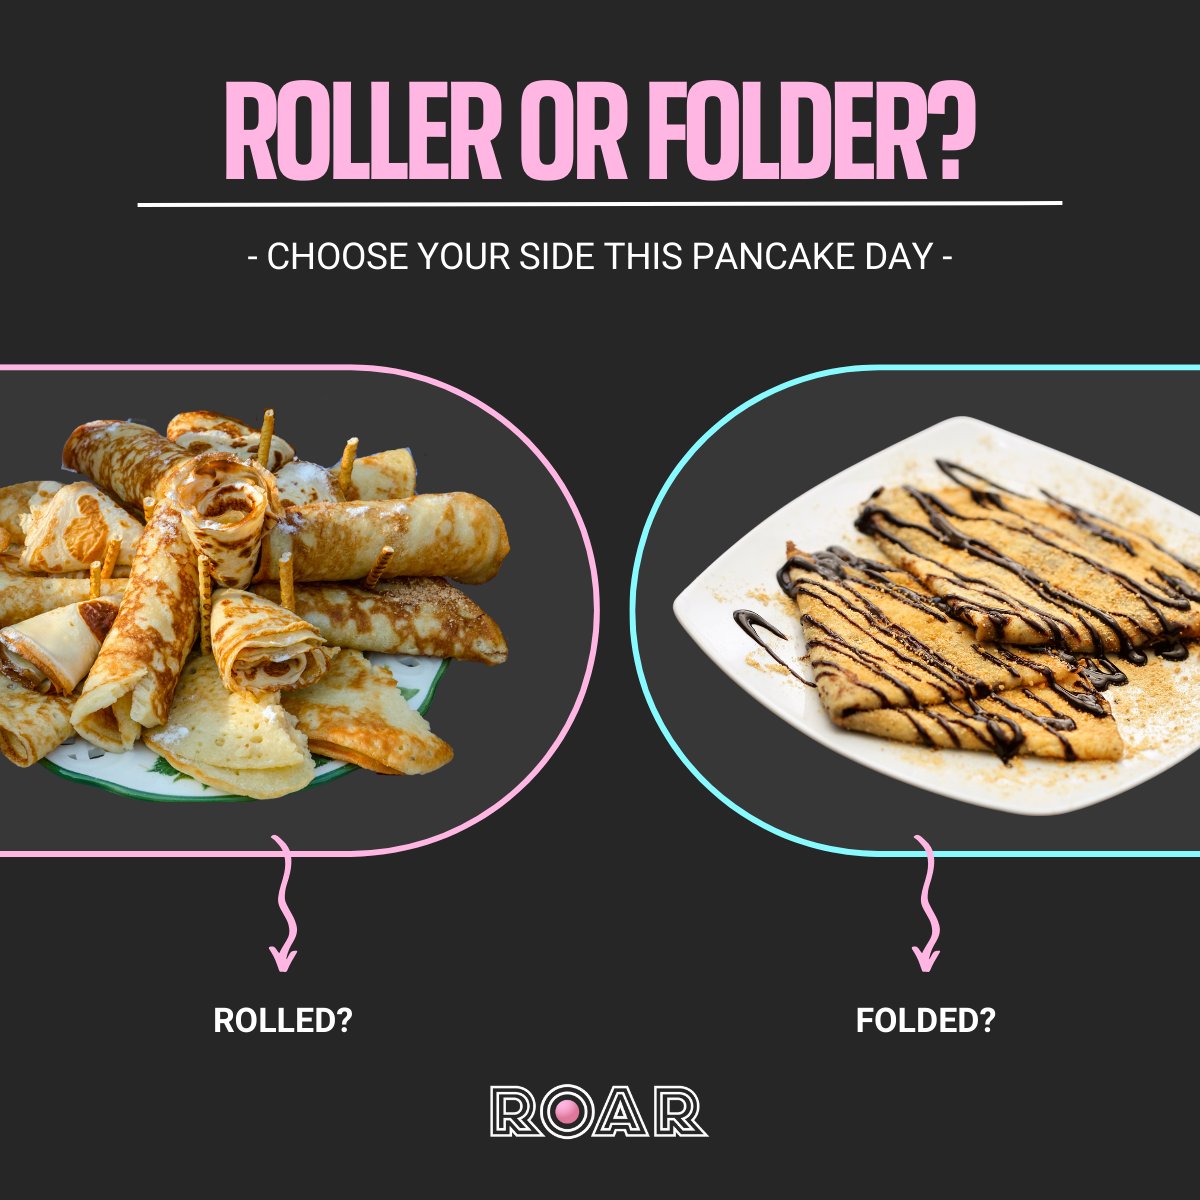 Happy Pancake Day 🥞 Whether you reach for lemon and sugar, Nutella, or jam, the real question is whether you roll or fold your pancakes. 🤷‍♂️ Help us settle the debate 👇 #pancakeday #officequestions #rollorfold